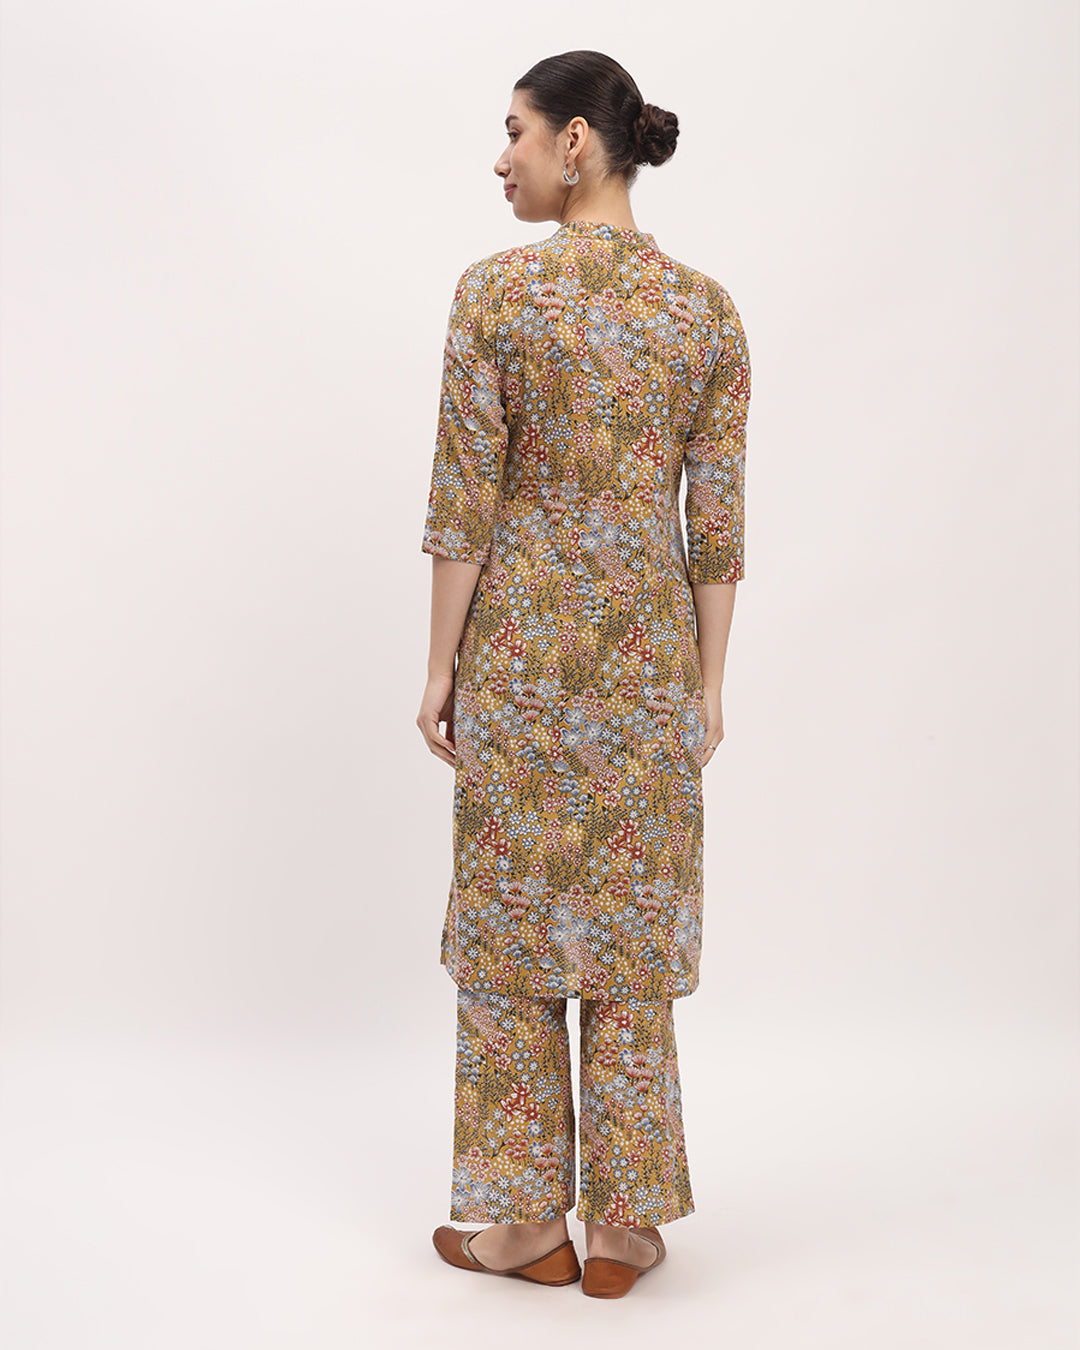 Combo: Golden Blossom & English Floral Garden High-Low Printed Kurta (Without Bottoms)